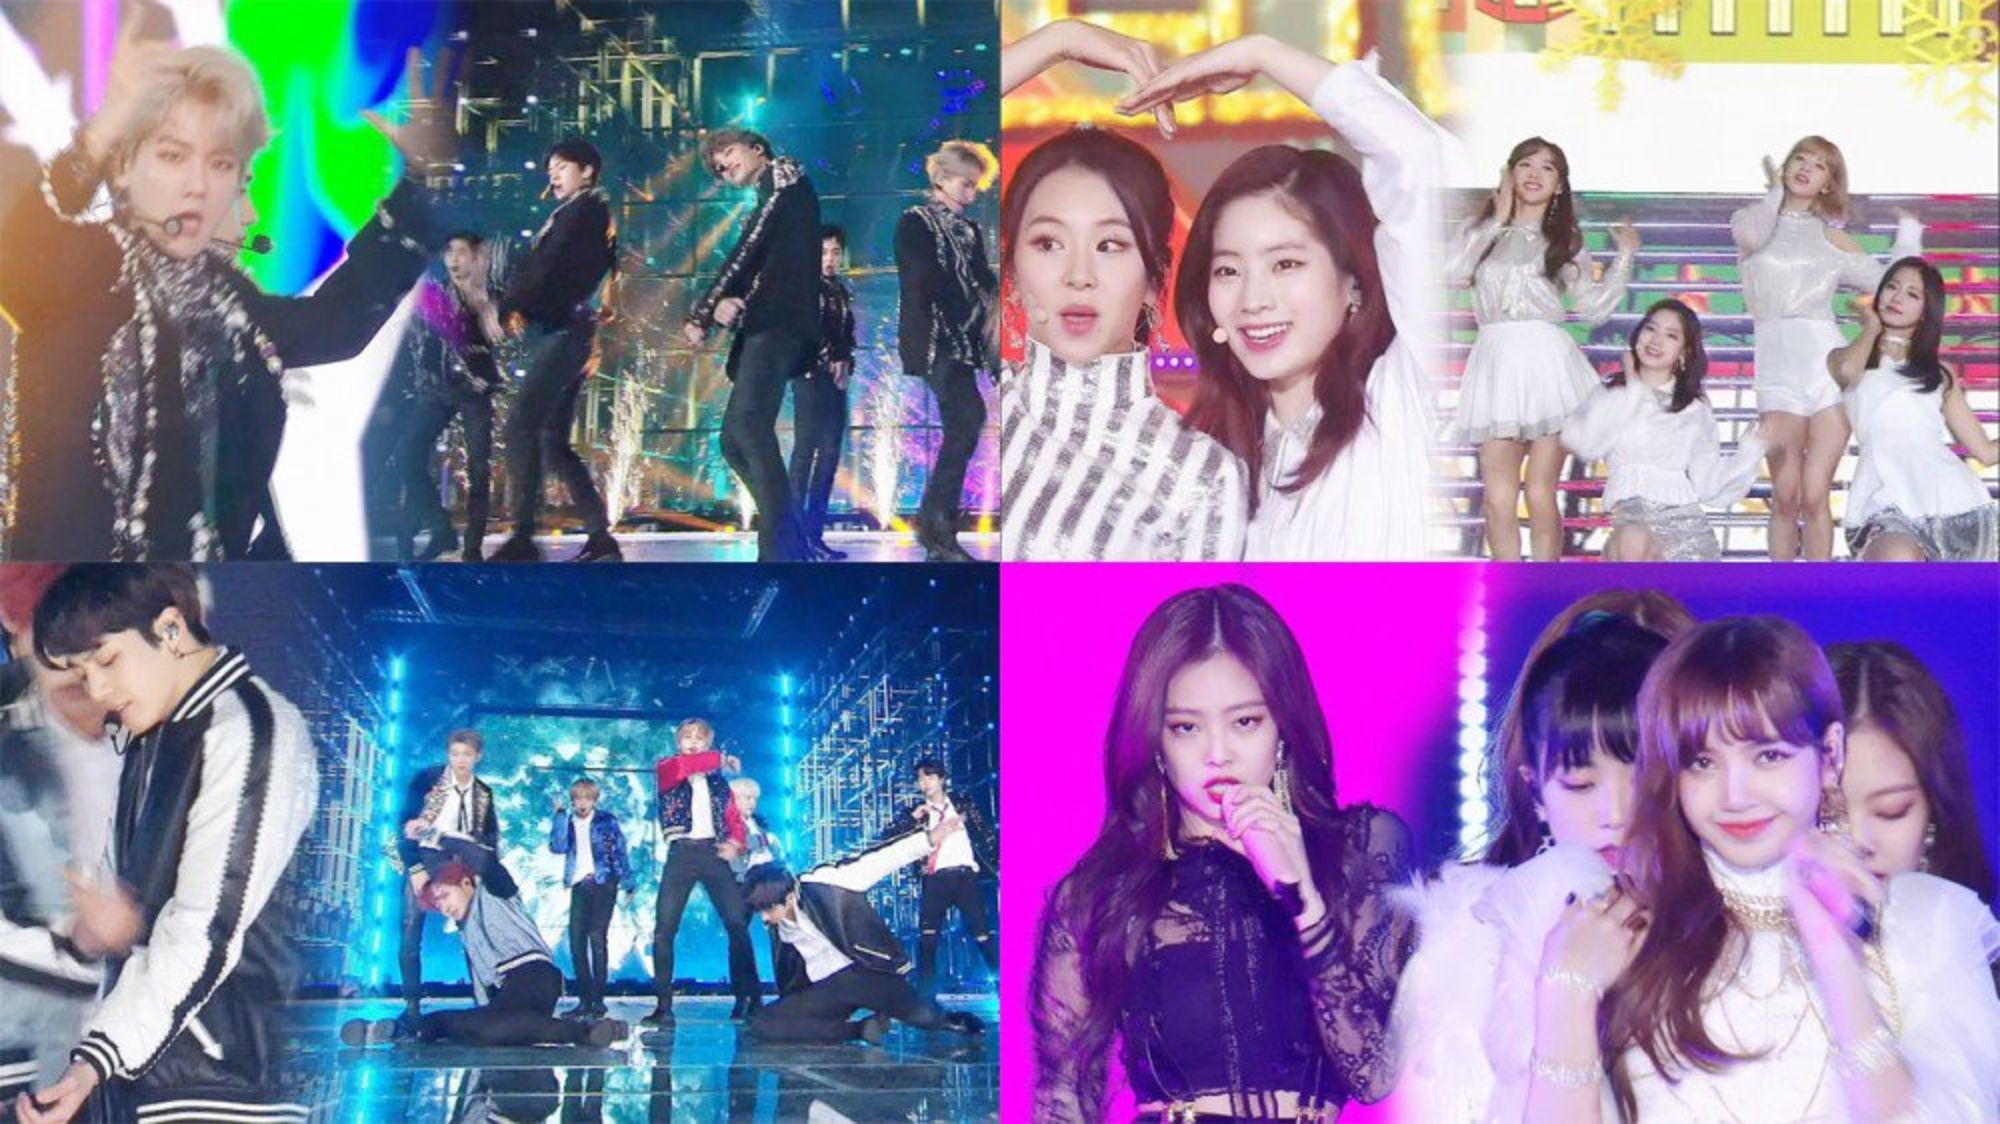 Bts Black Pink Twice Exo Got7 Wanna One Red Velvet And More Perform At 17 Sbs Gayo Daejeon